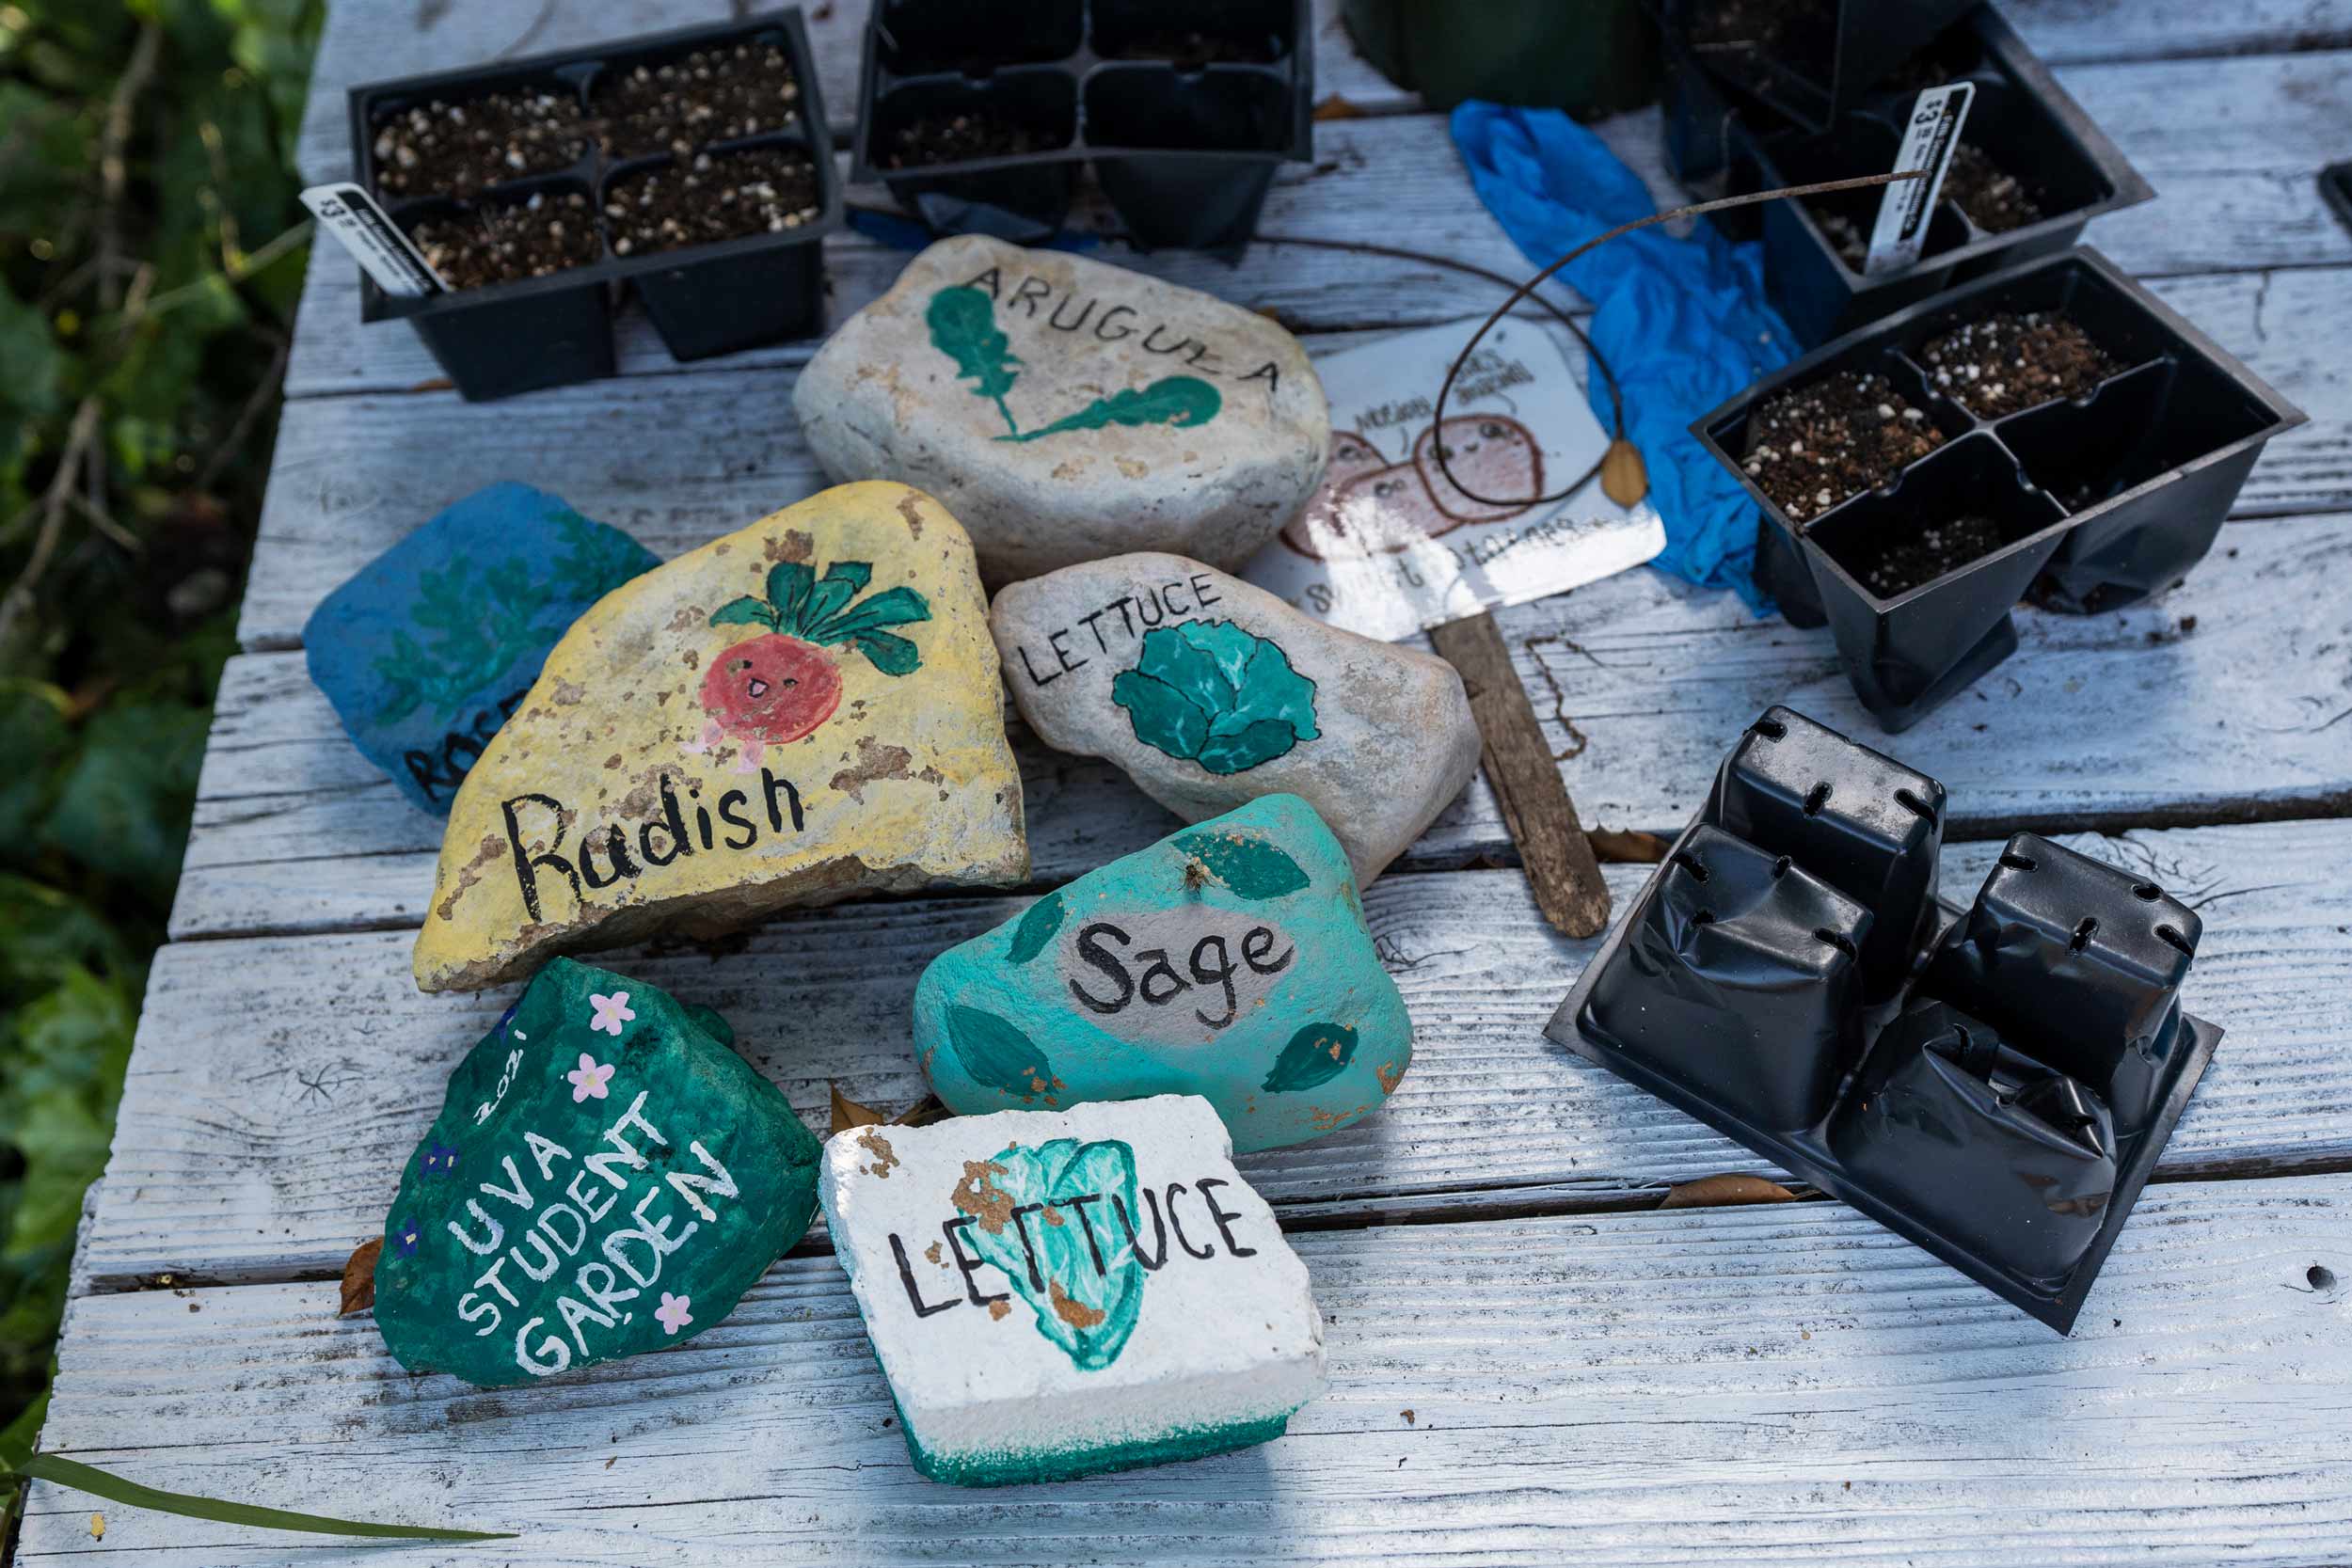 Rocks painted with the names of vegetables sit on a wooden bench.